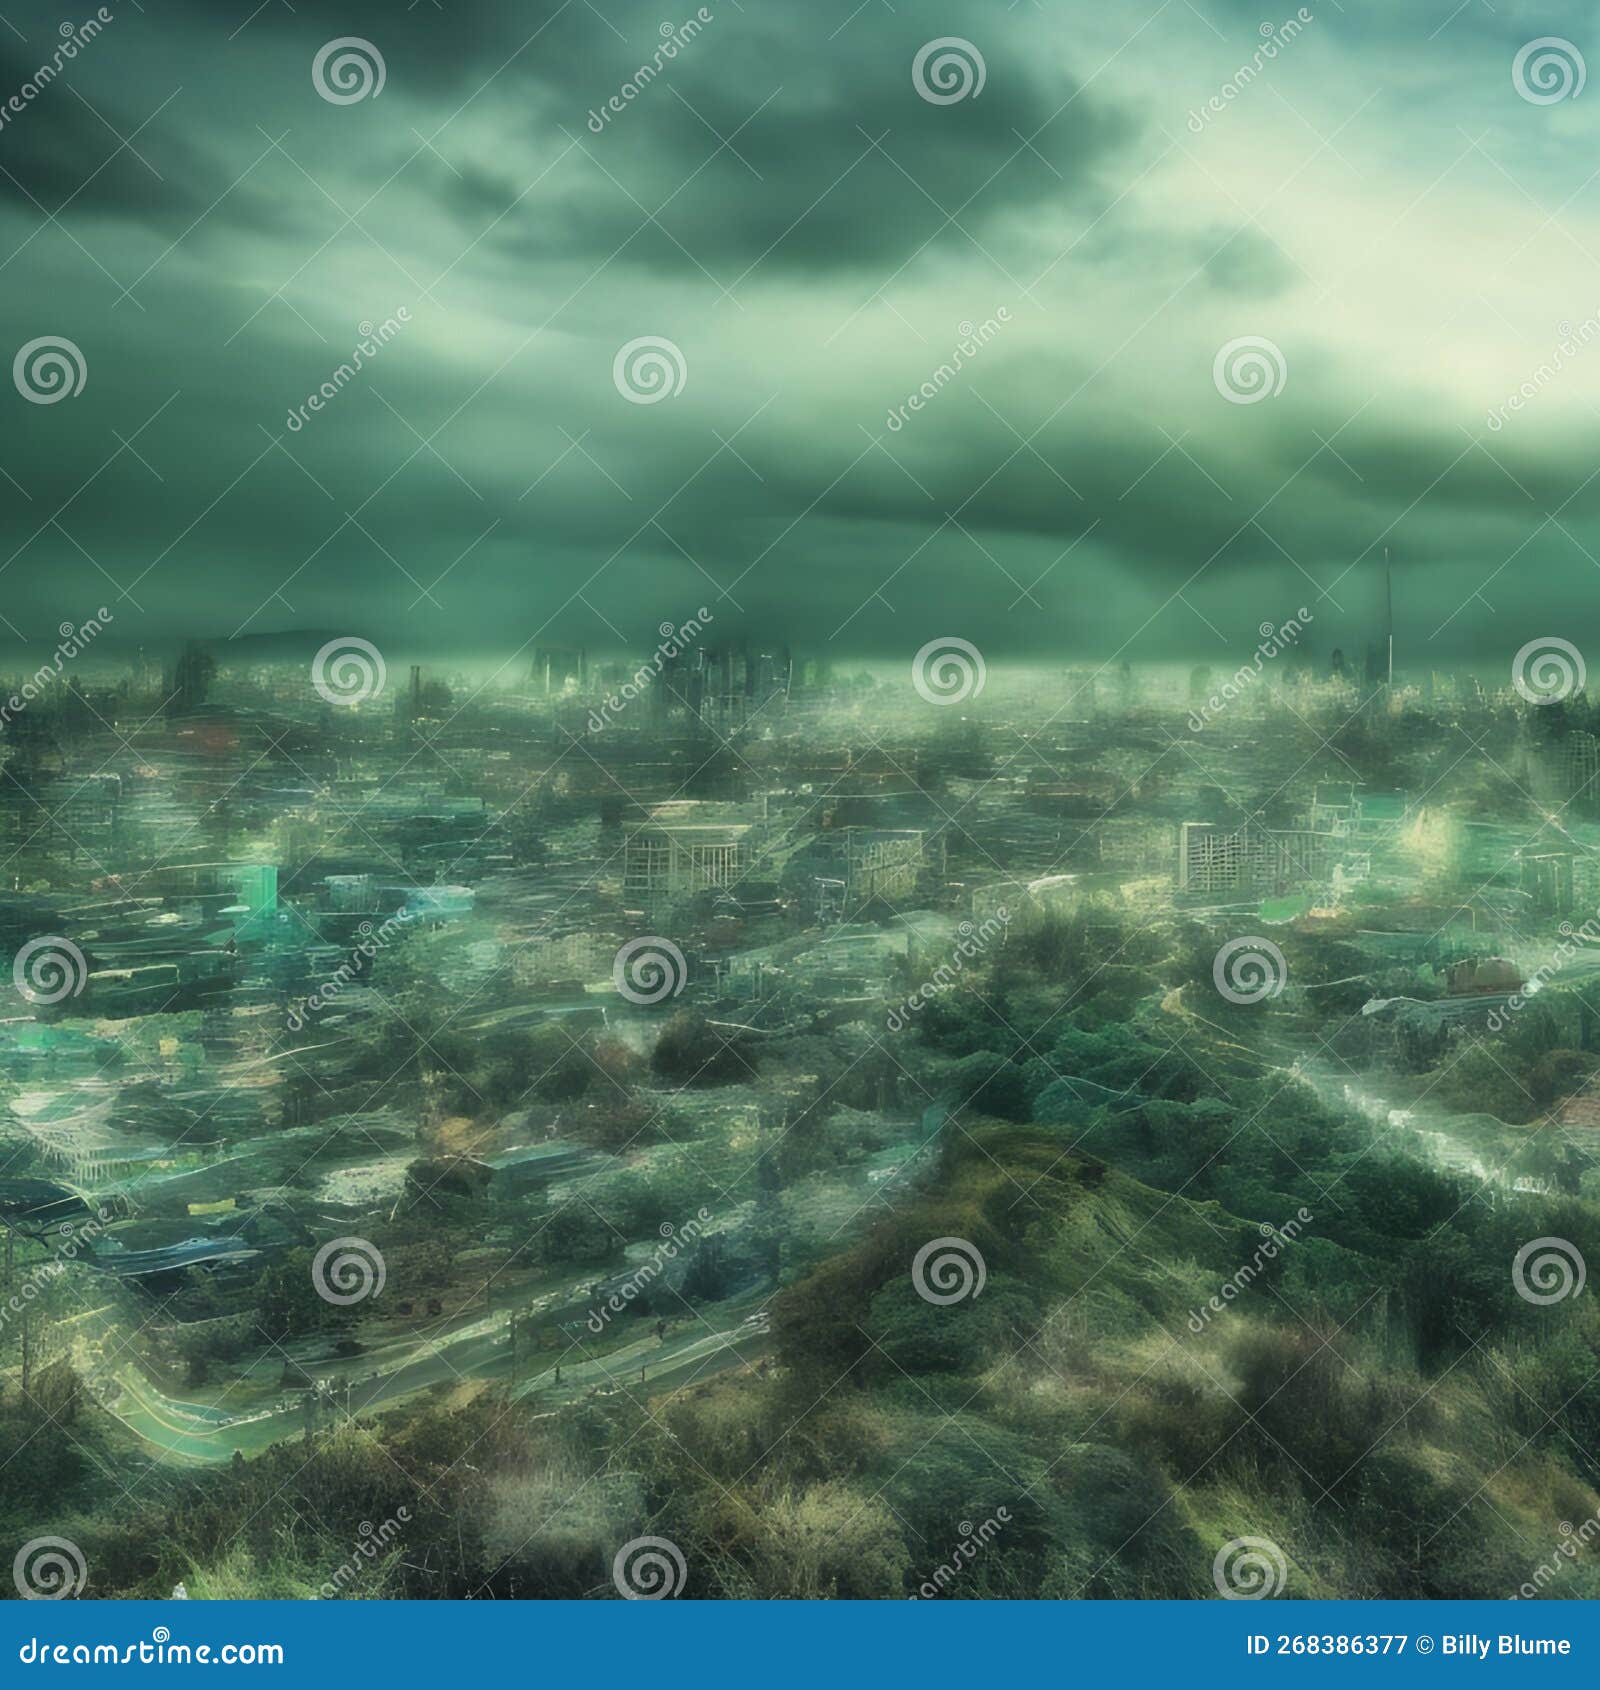 Abstract Fictional Scary Dark Wasteland City Background Light Green